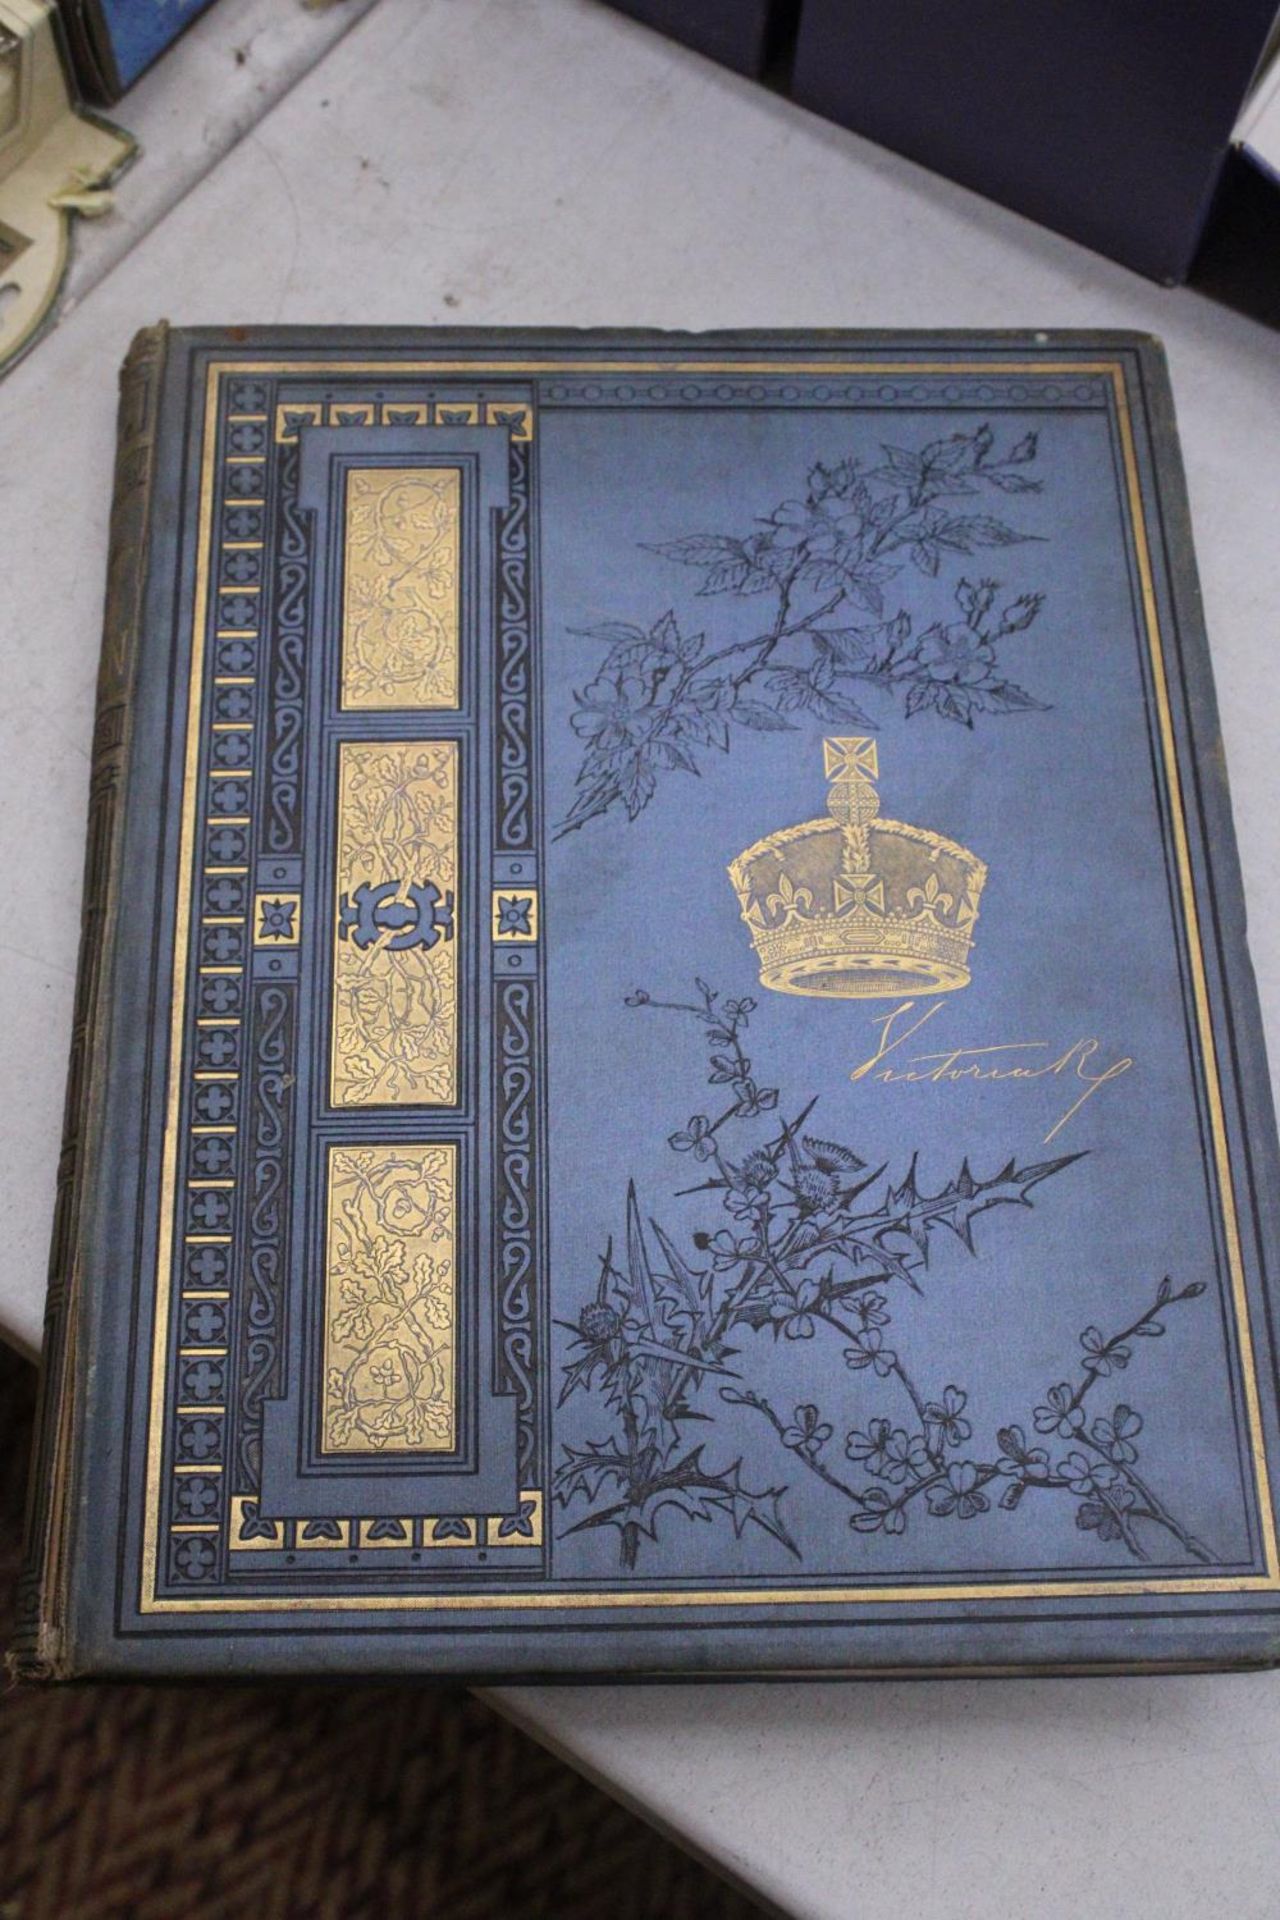 TWO VINTAGE COPIES OF 'THE LIFE OF THE MOST GRACIOUS MAJESTY, THE QUEEN' (VICTORIA) PLUS A VINTAGE - Image 5 of 6